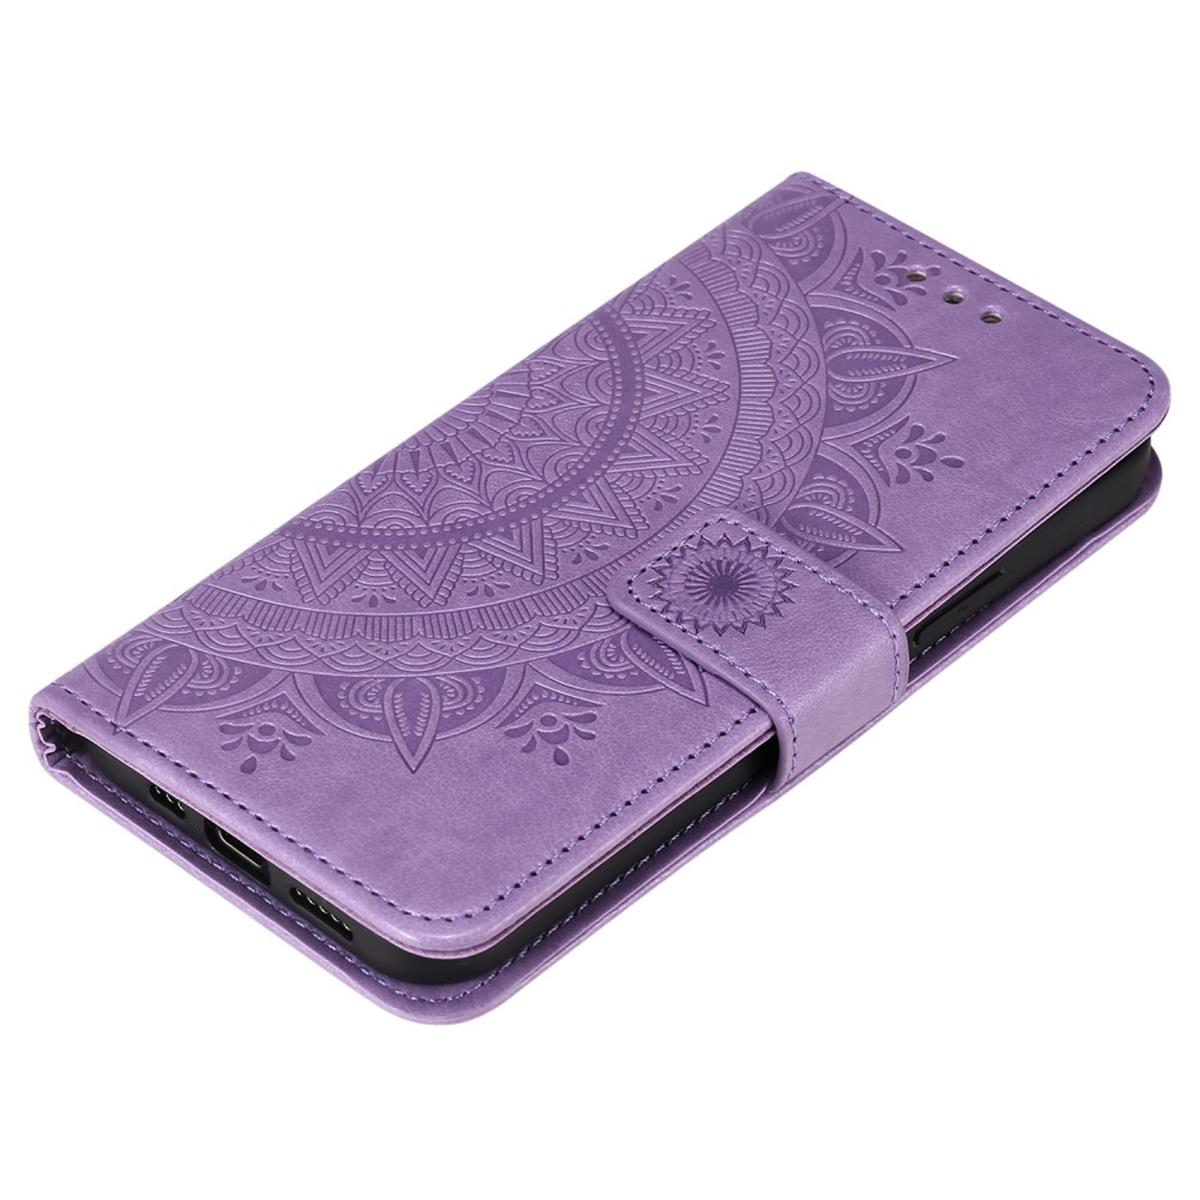 COVERKINGZ Klapphülle mit Mandala Muster, Lila Bookcover, iPhone Pro 12 Apple, Max